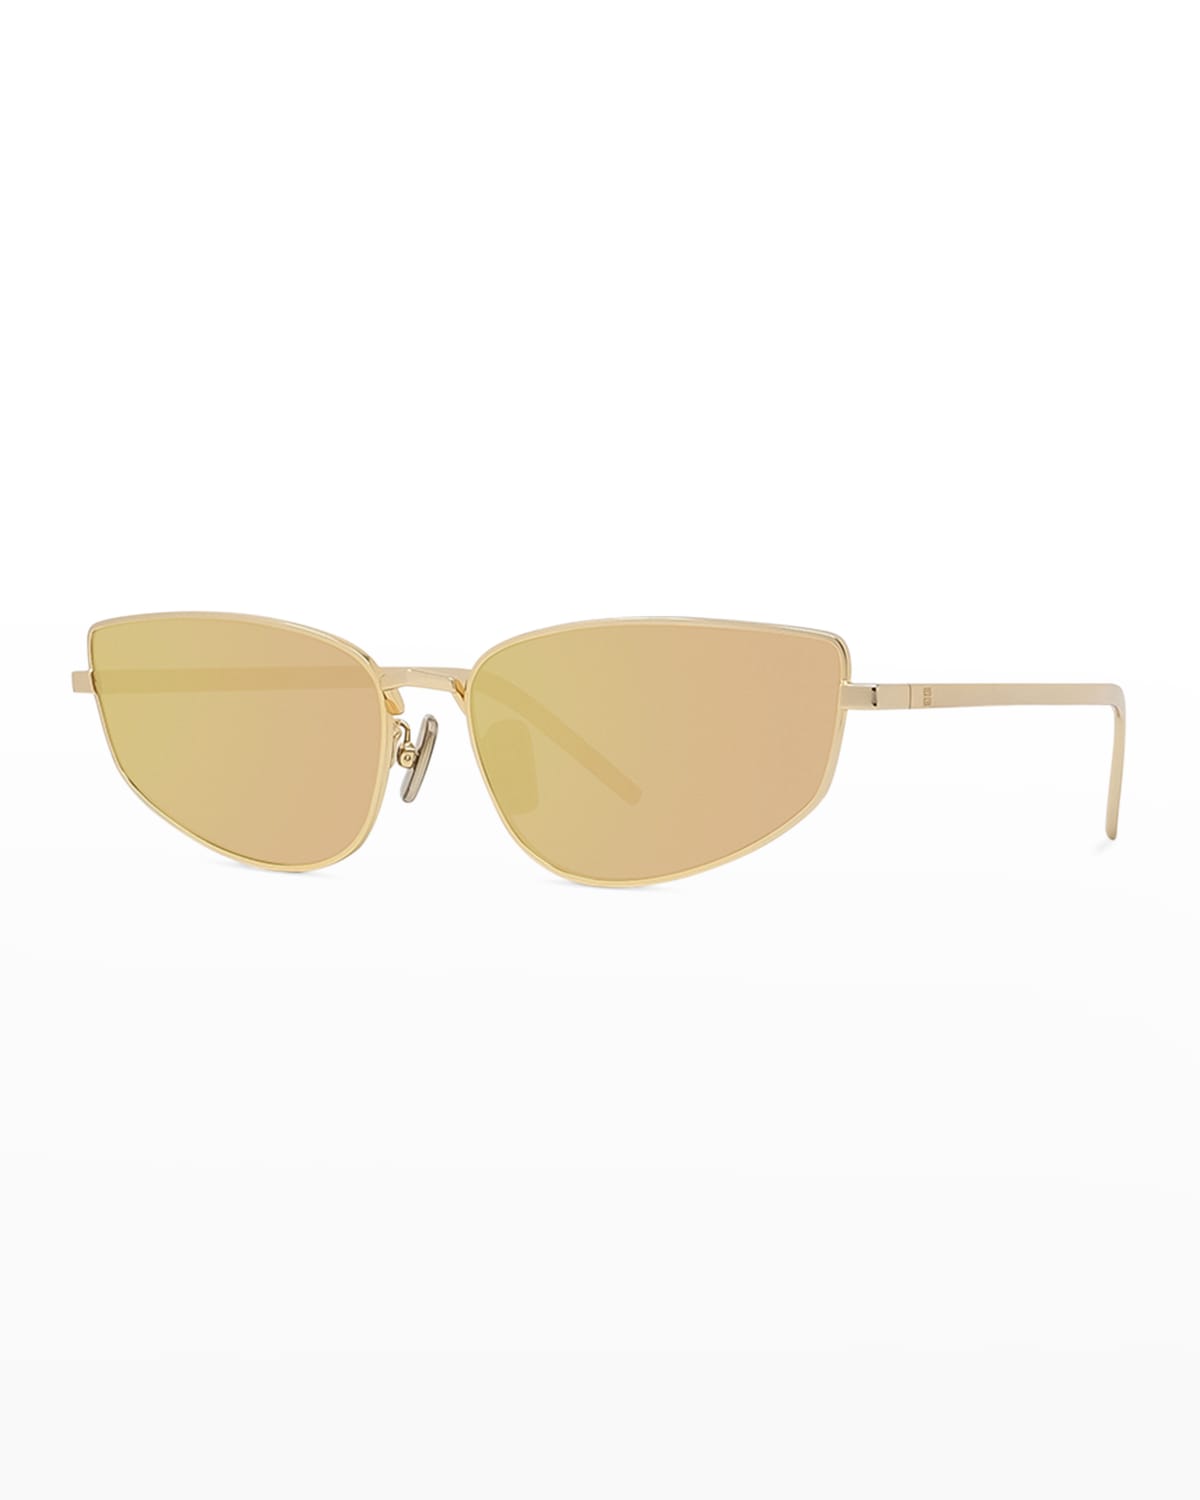 Givenchy Mirrored Metal Cat-eye Sunglasses In Golden Brown